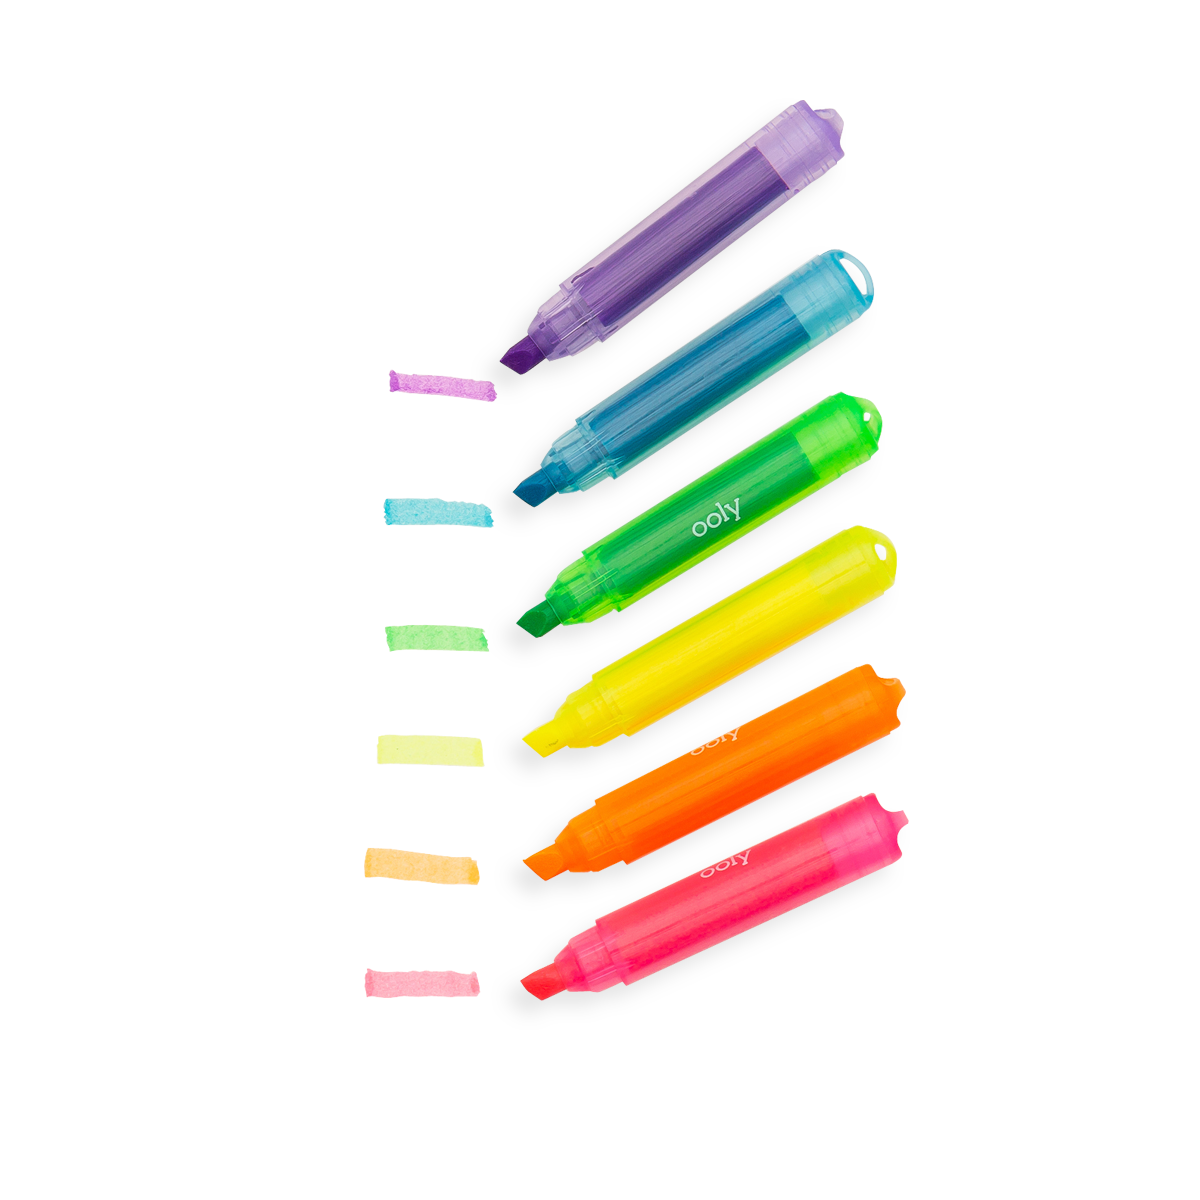 OOLY Jumbo Juicy Scented Highlighters - Set of 6